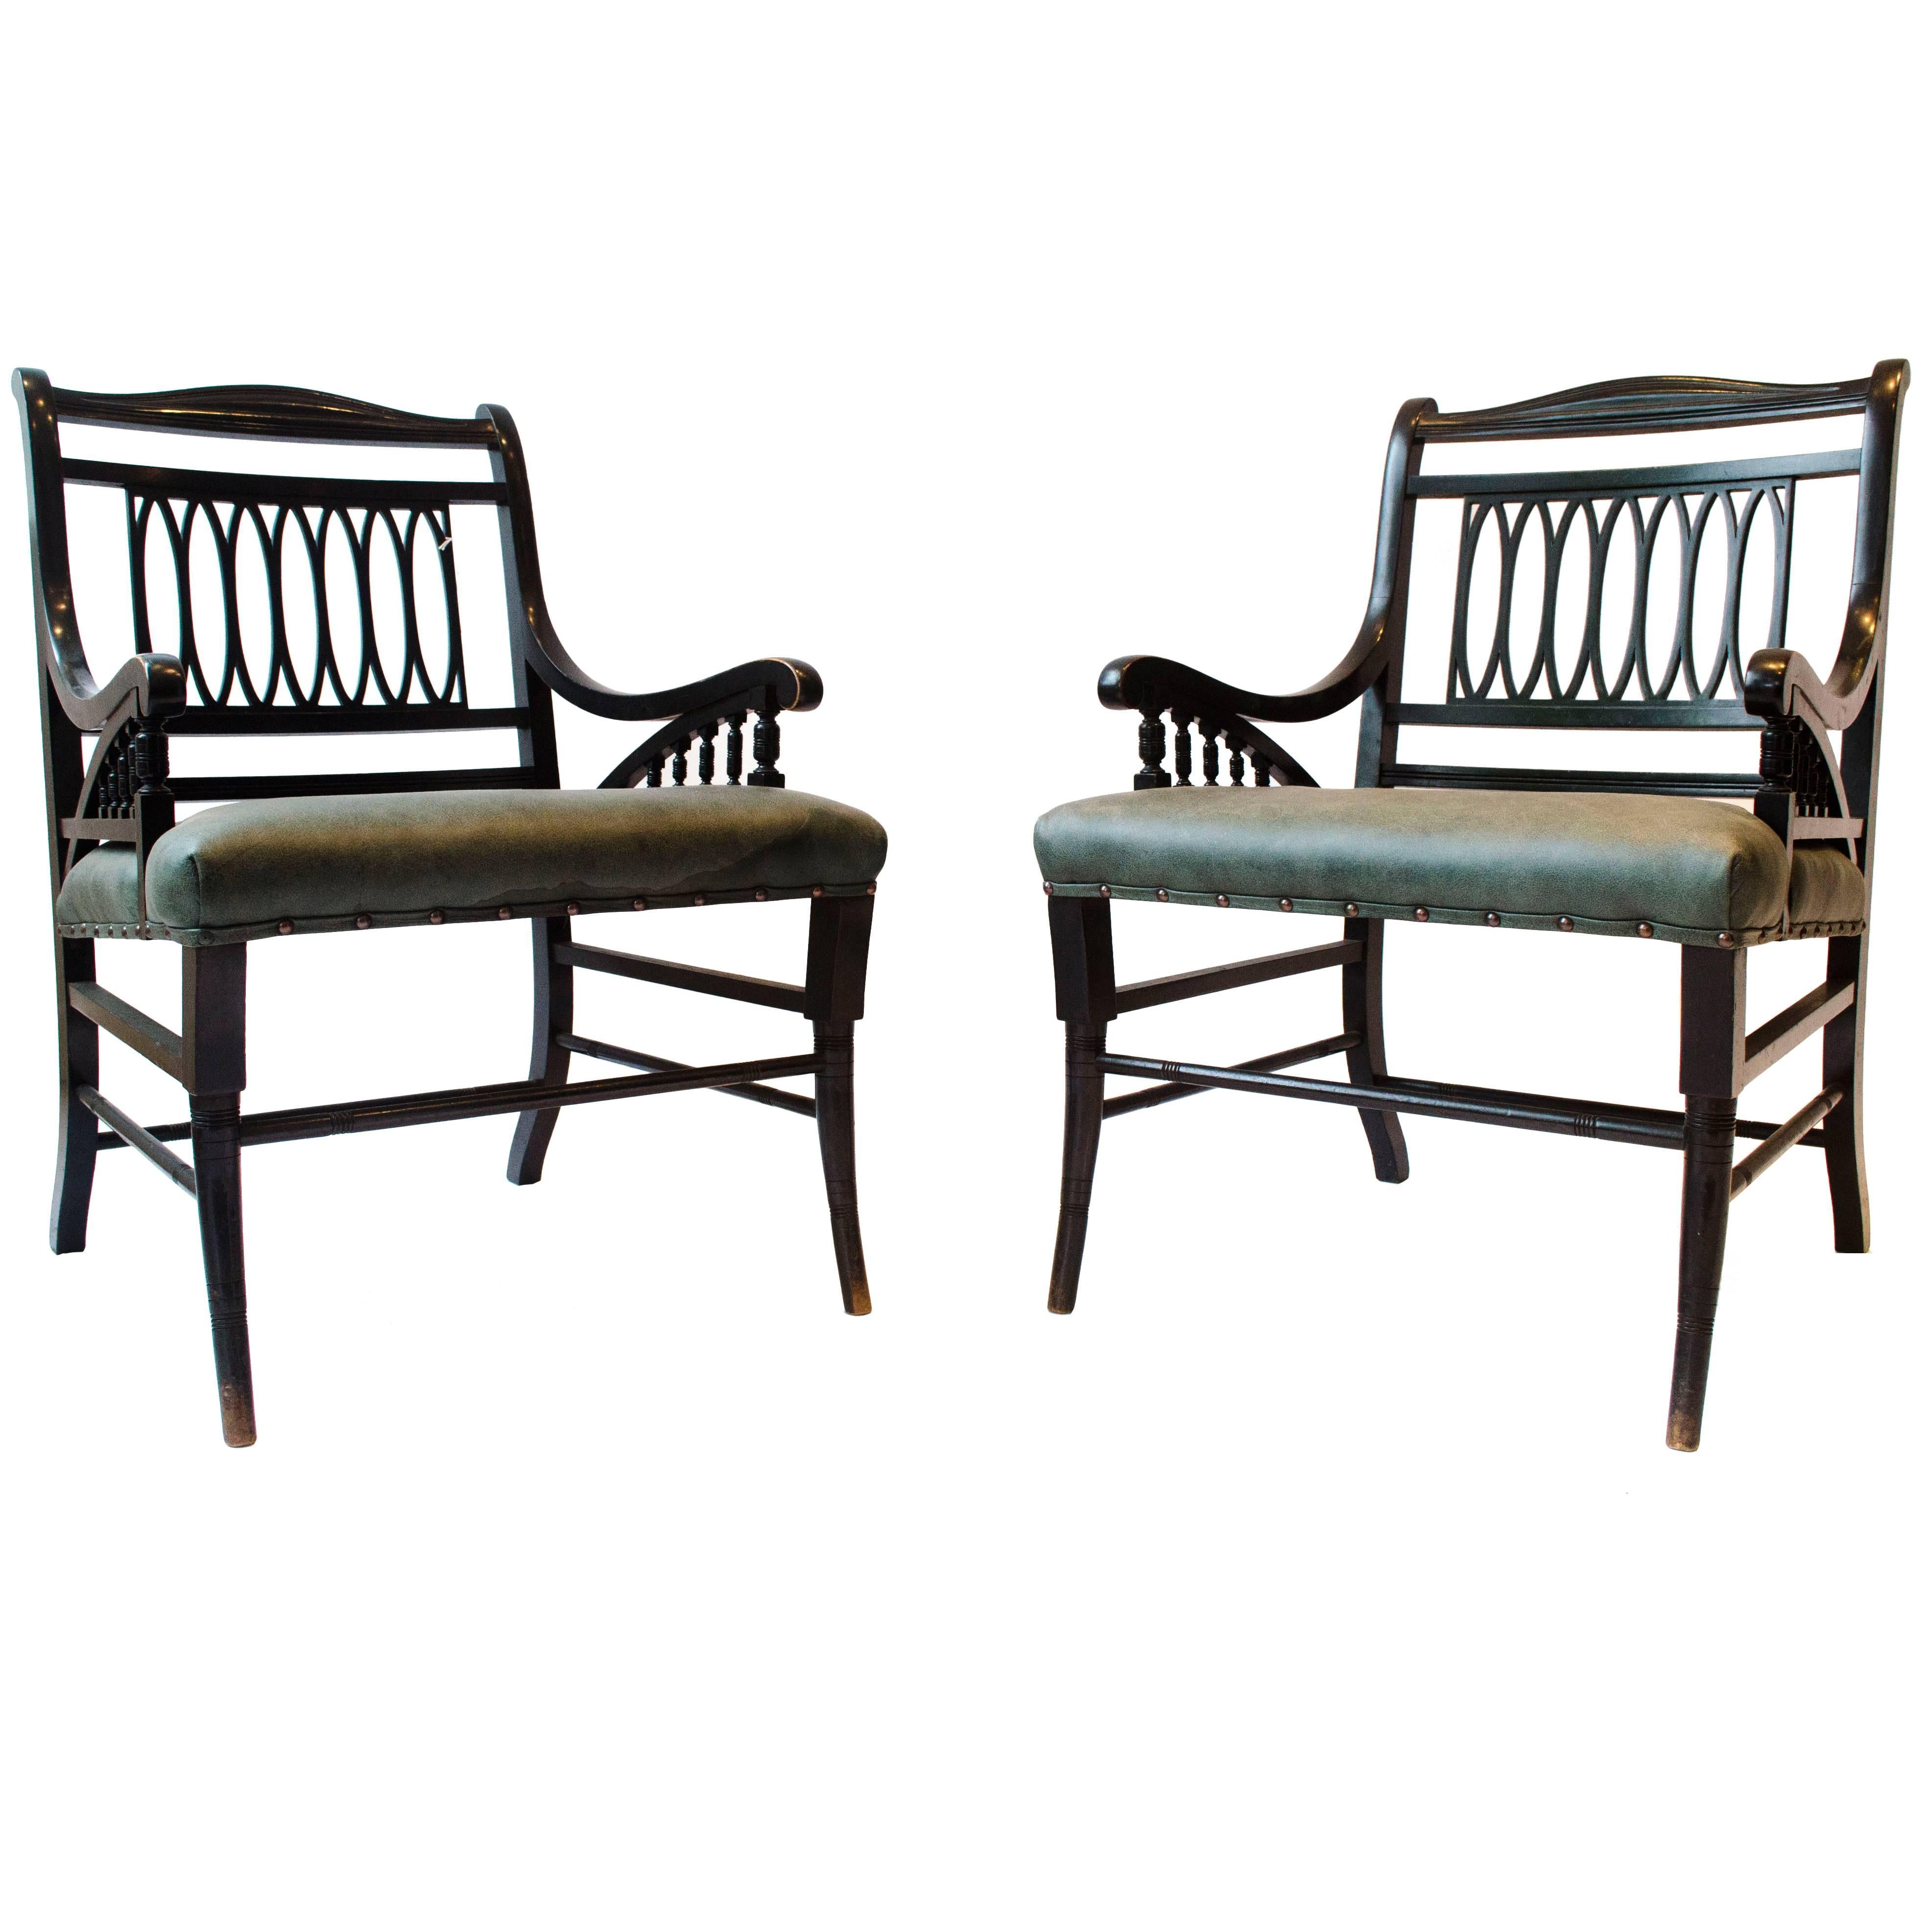 Pair of Anglo-Japanese Ebonized Open Armchairs. Attributed to Jas Shoolbred For Sale